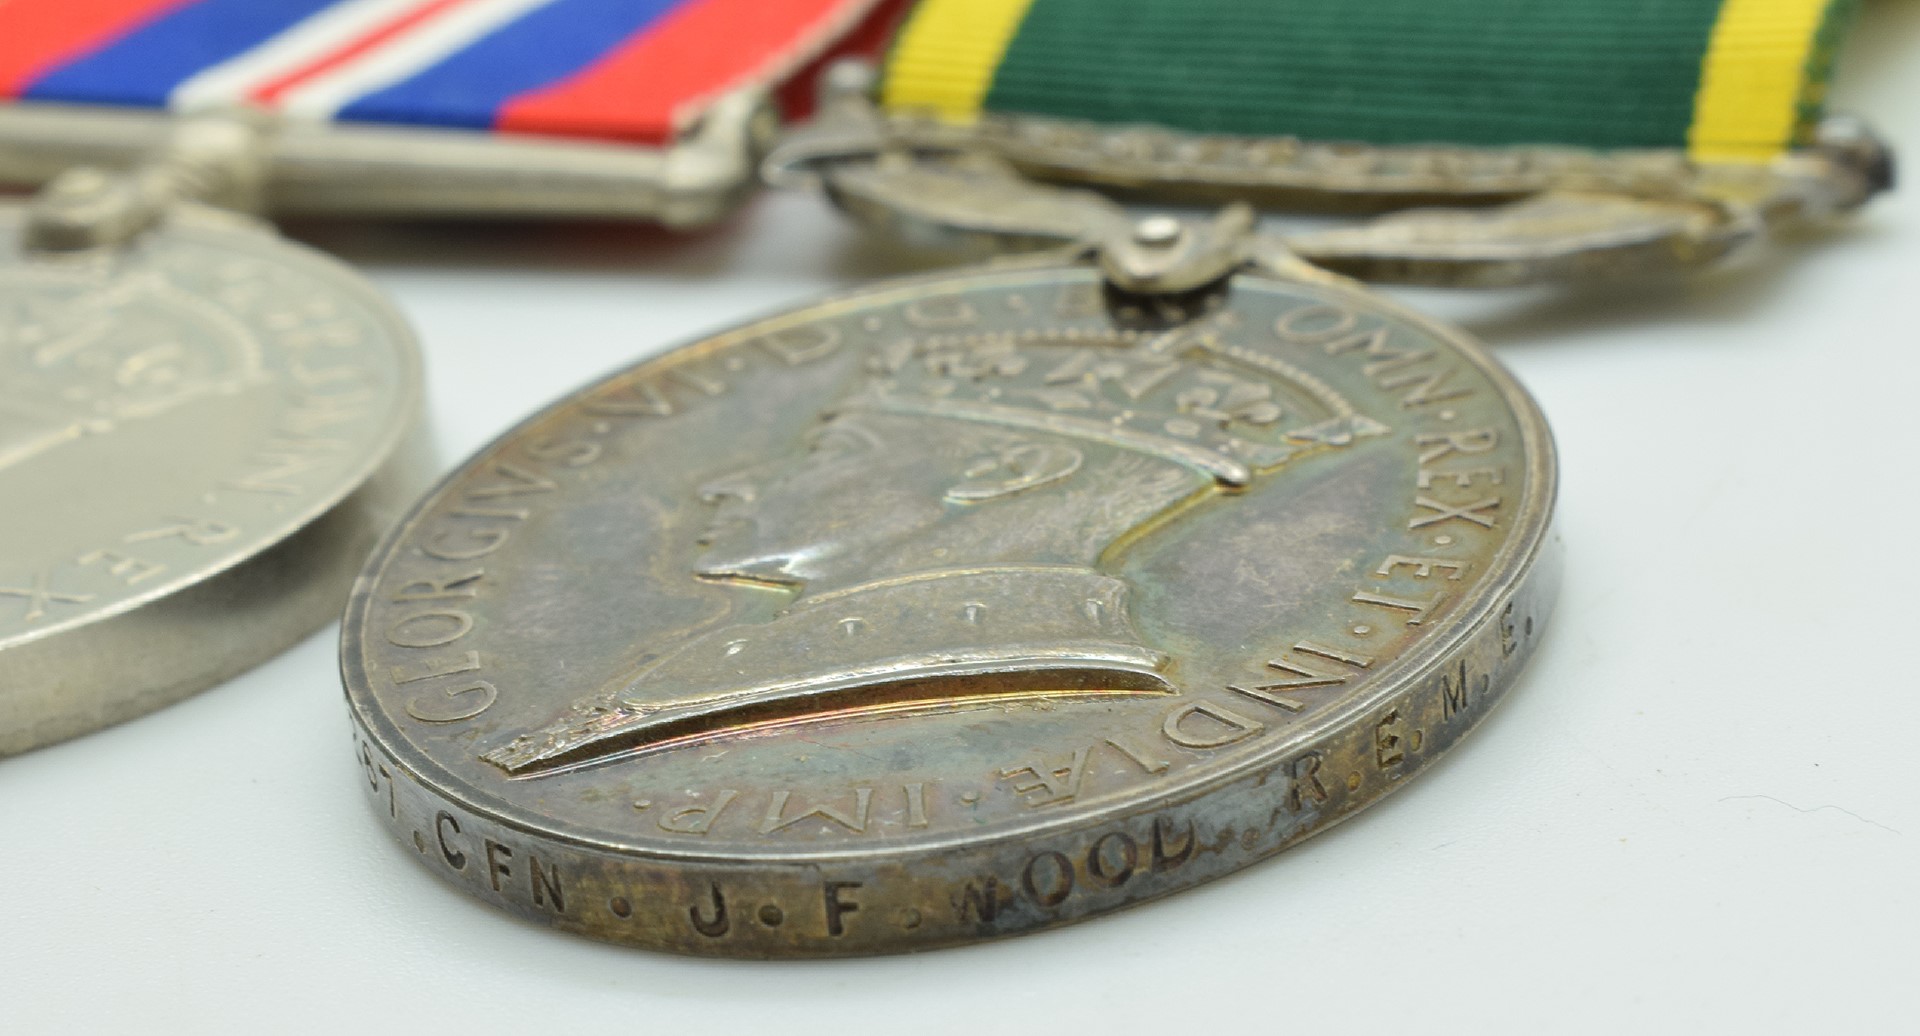 British Army WW2 medals comprising 1939-1945 Star, Italy Star, Defence Medal, War Medal and - Image 5 of 5